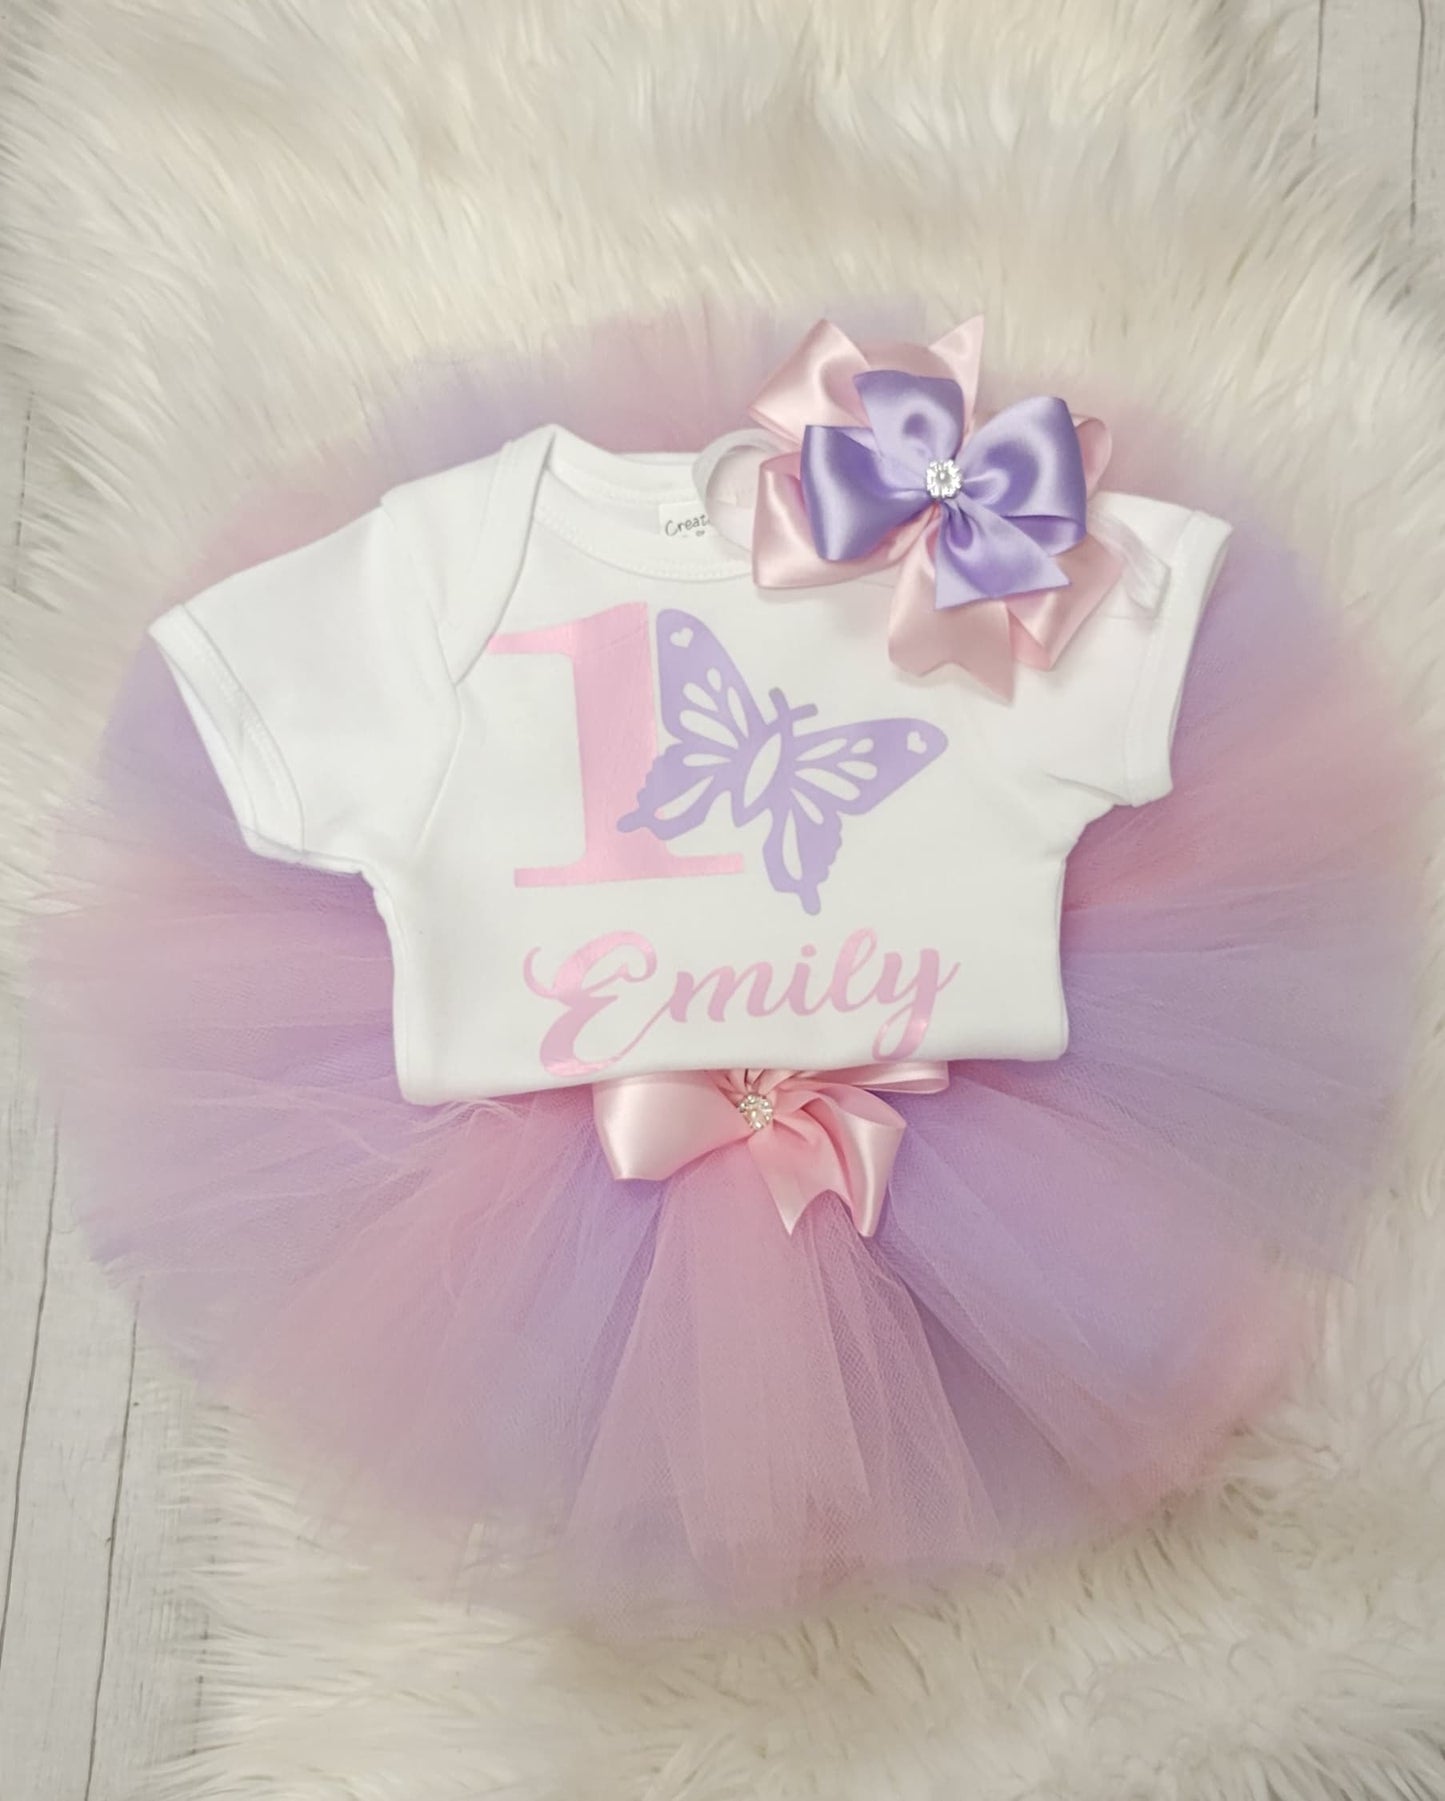 Butterfly tutu outfit for girl